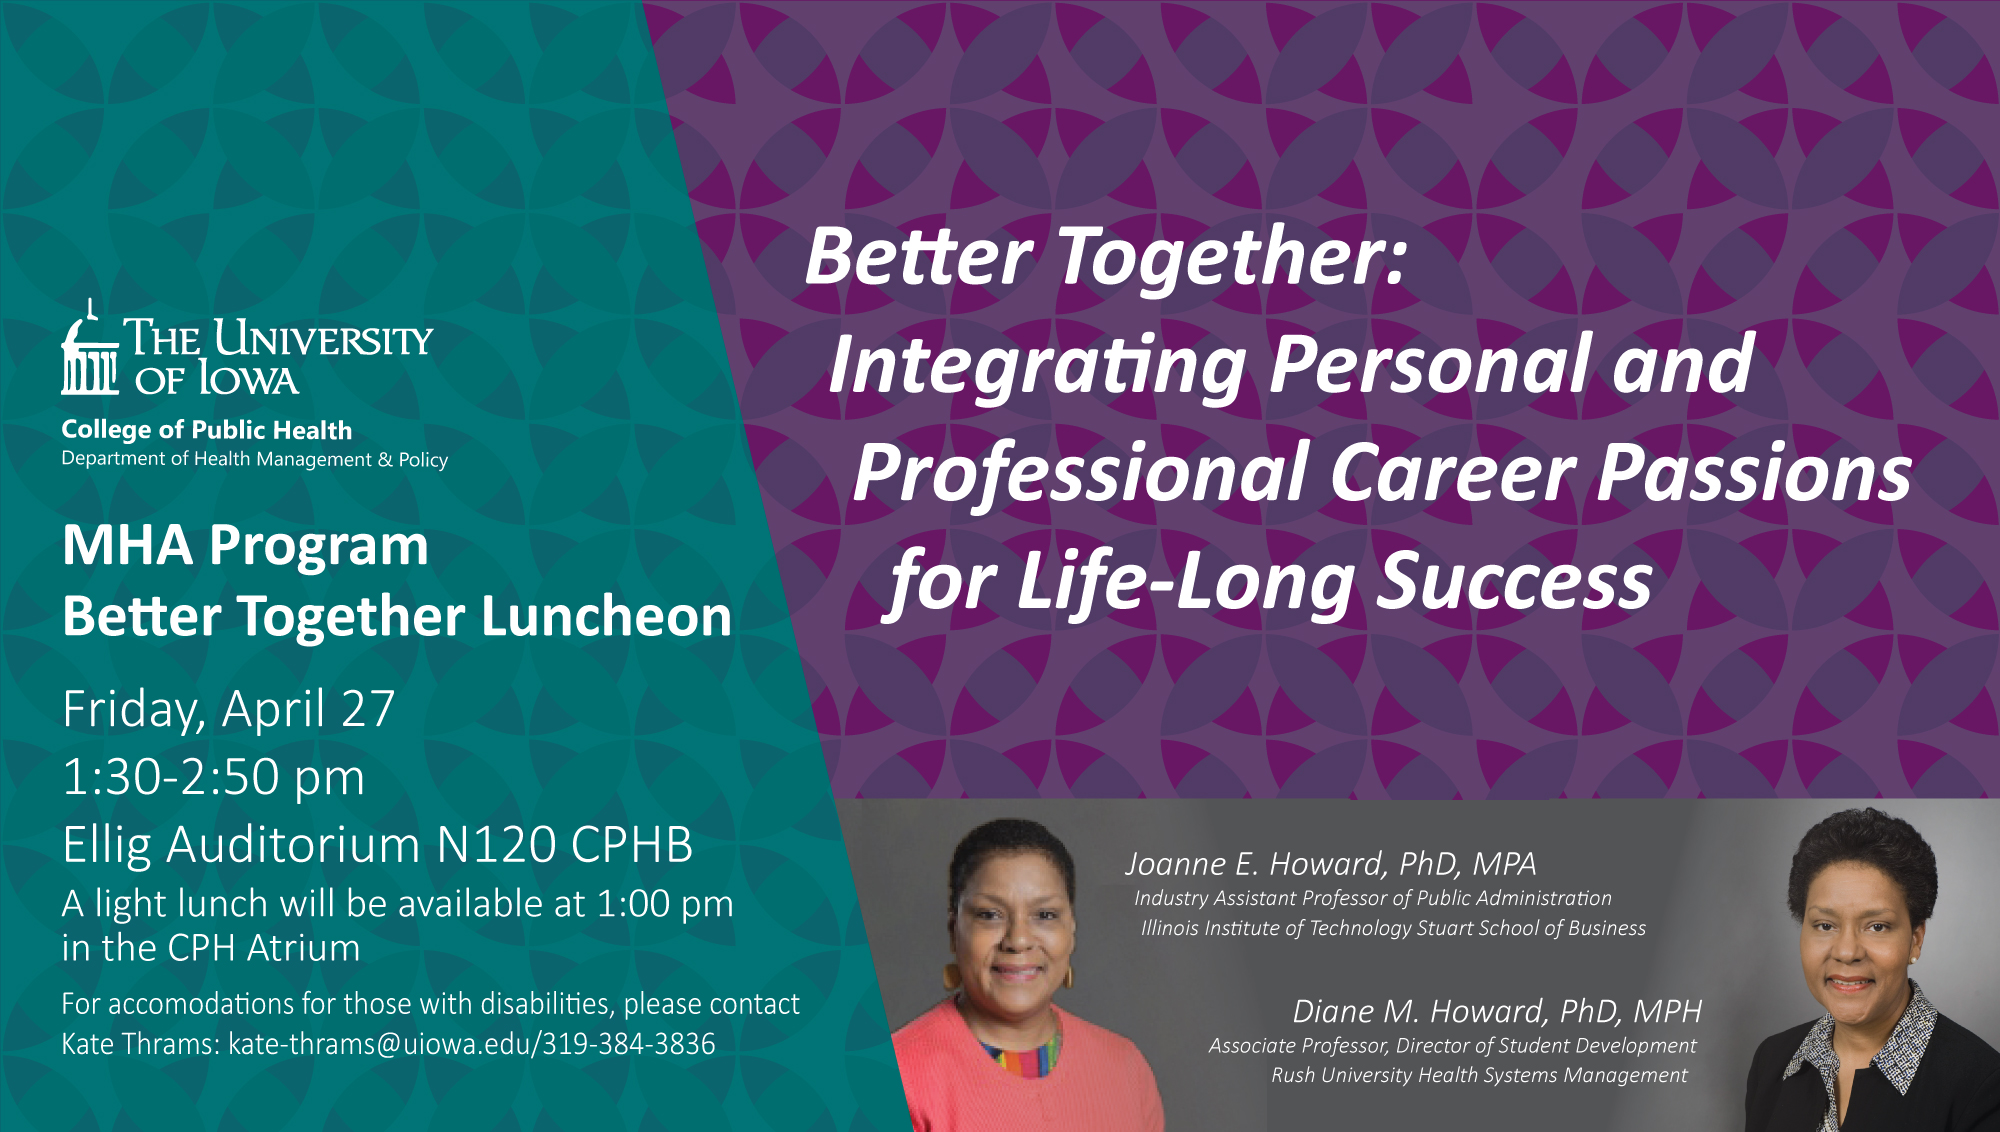 Better Together Luncheon April 27